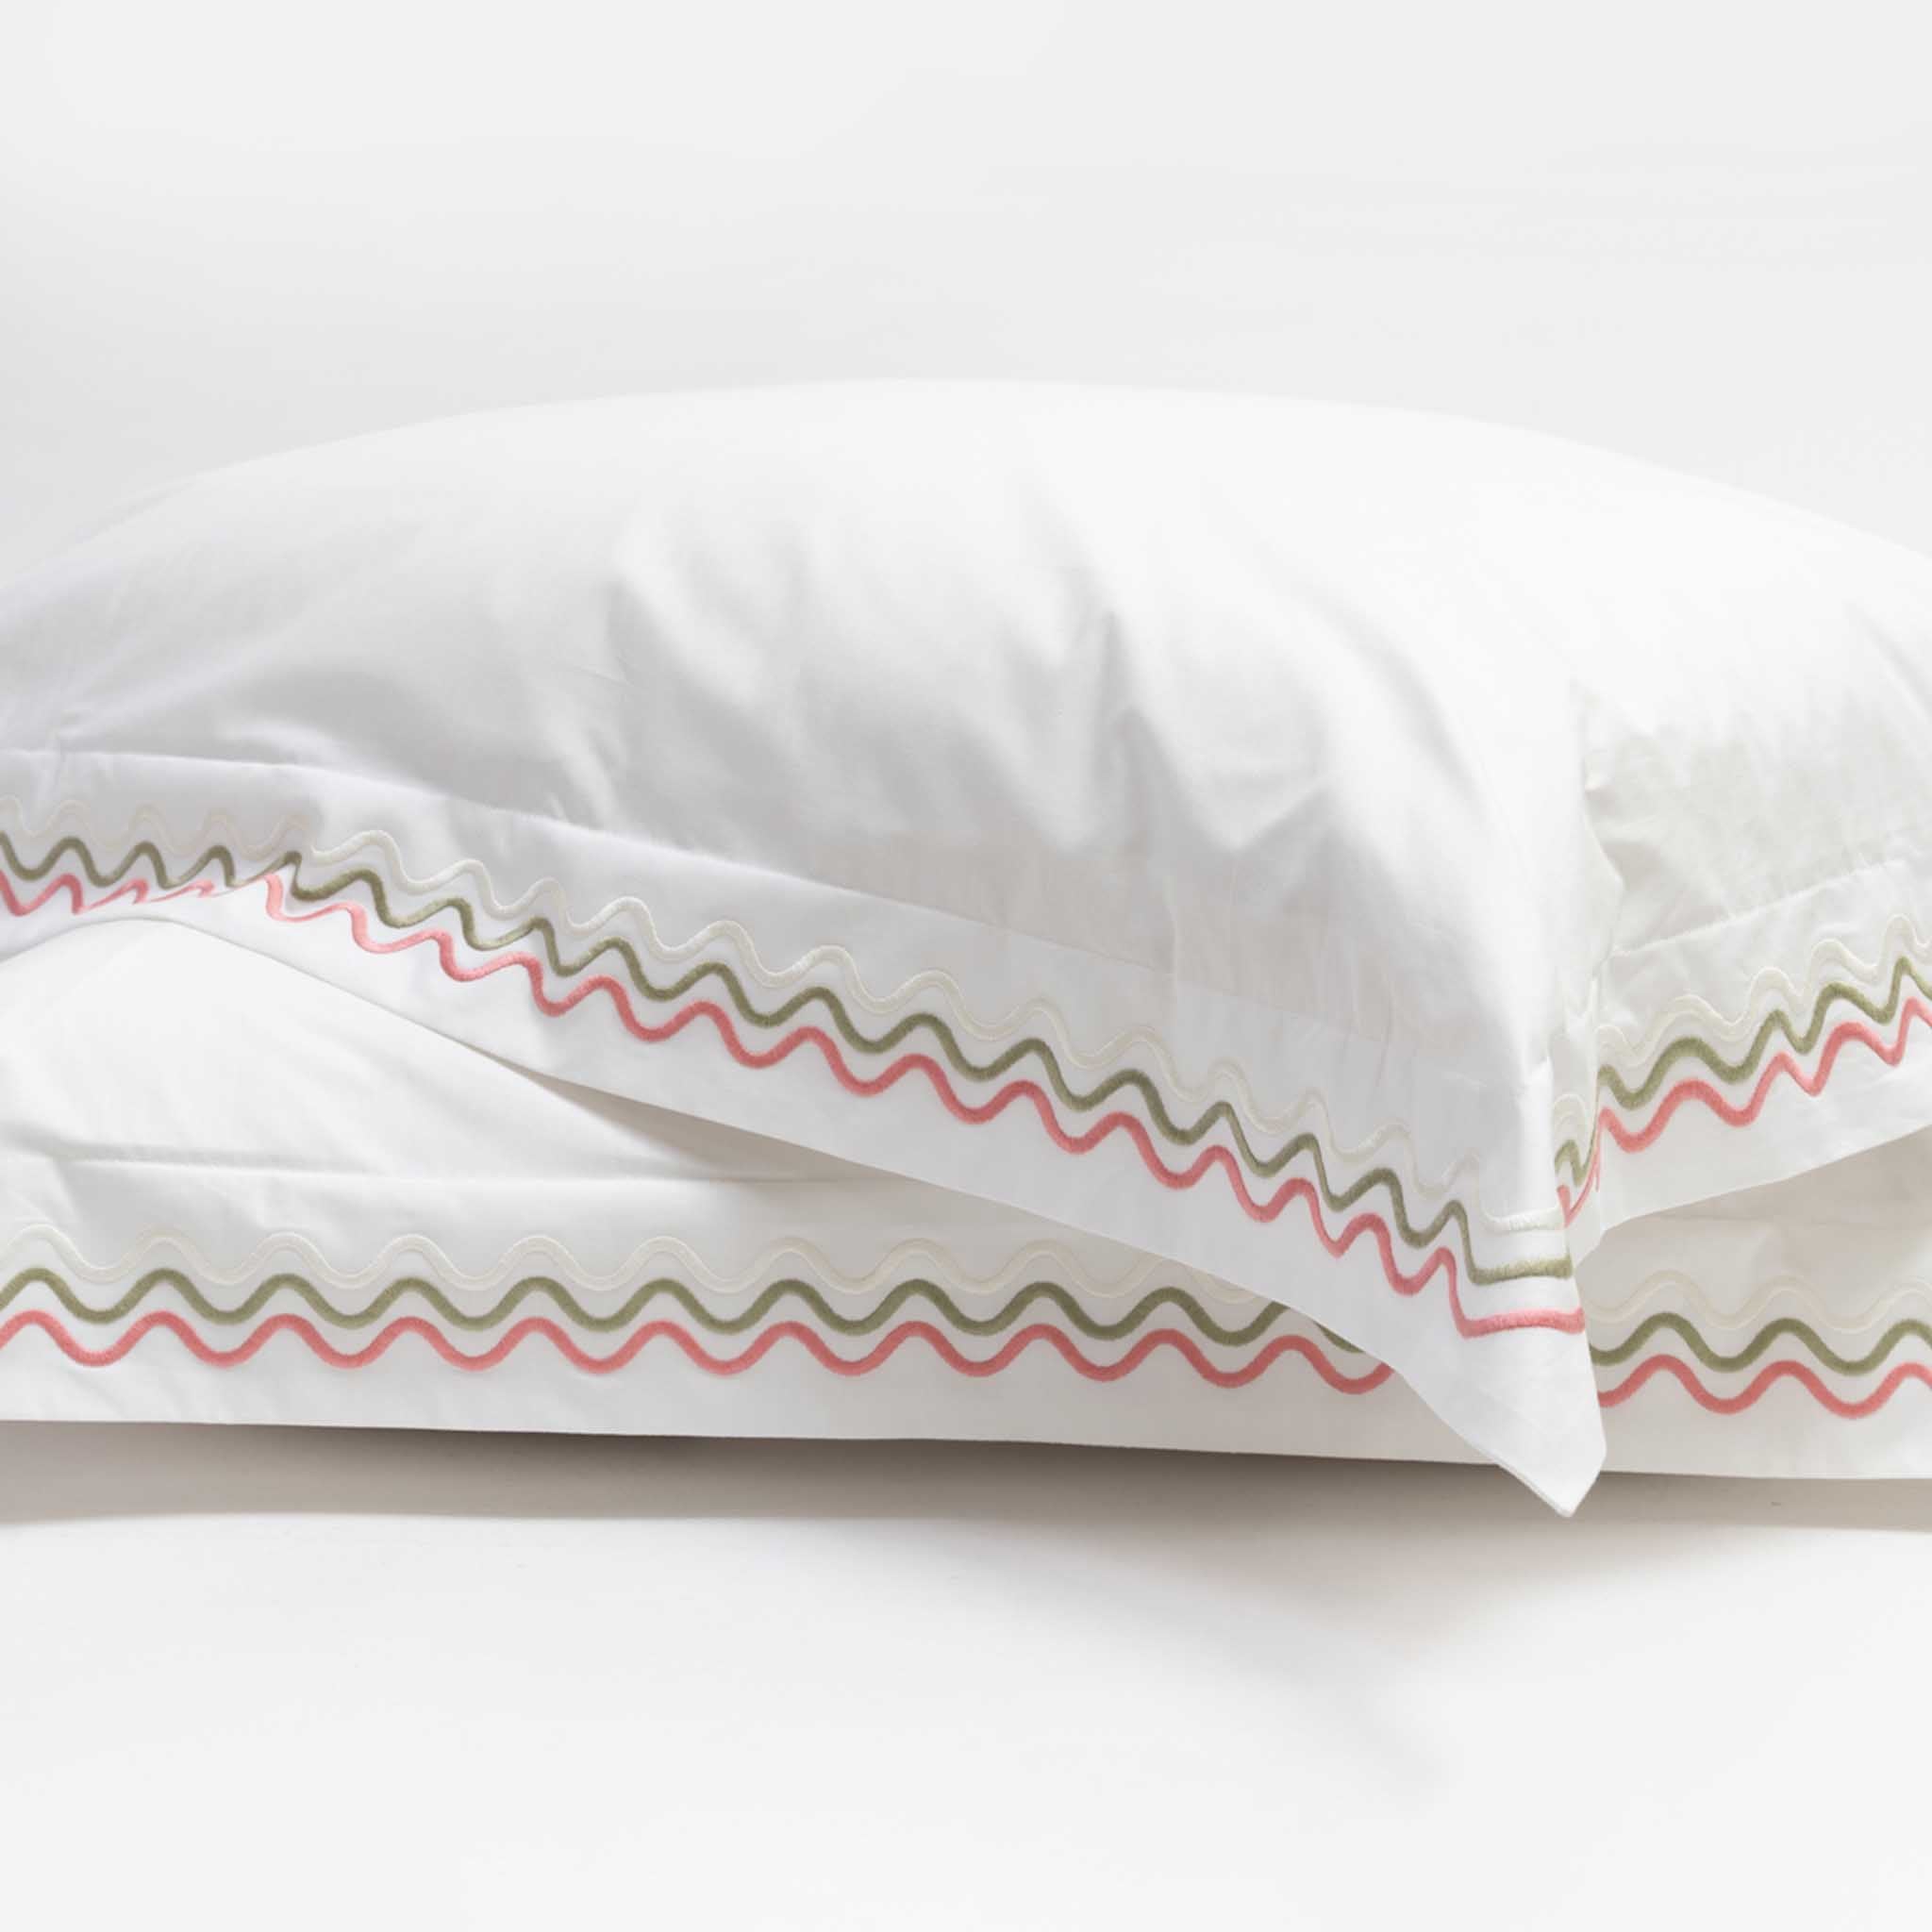 100% Egyptian Cotton Scalloped Luxury Bedding Set, Made in England by Peter Reed, Pink Embroidery